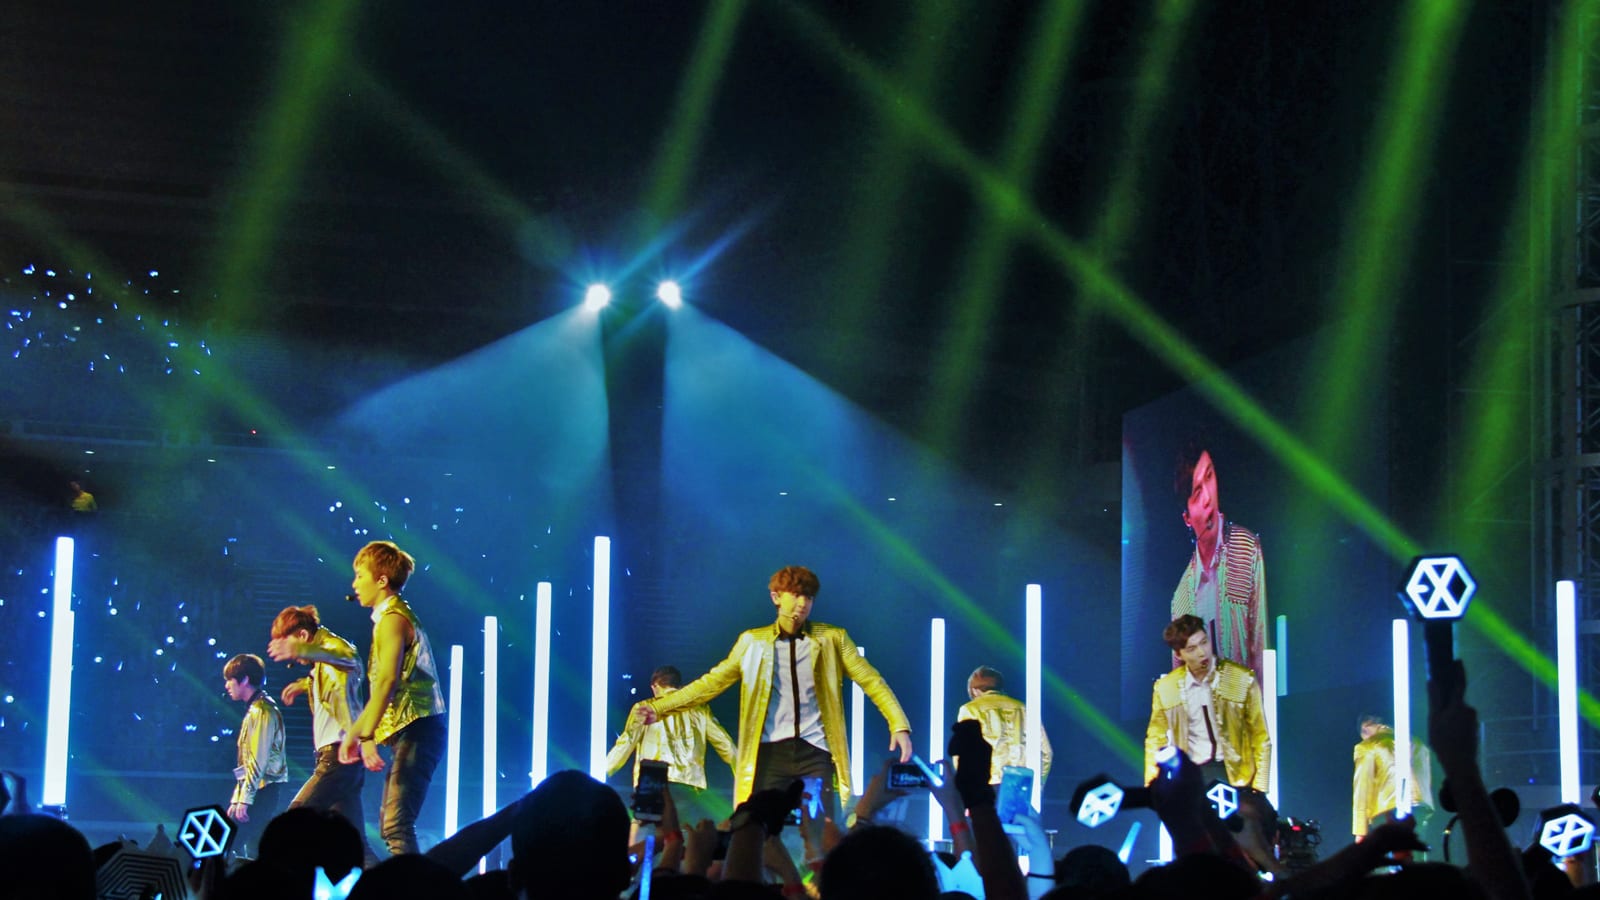 The Force is strong with EXO in Singapore